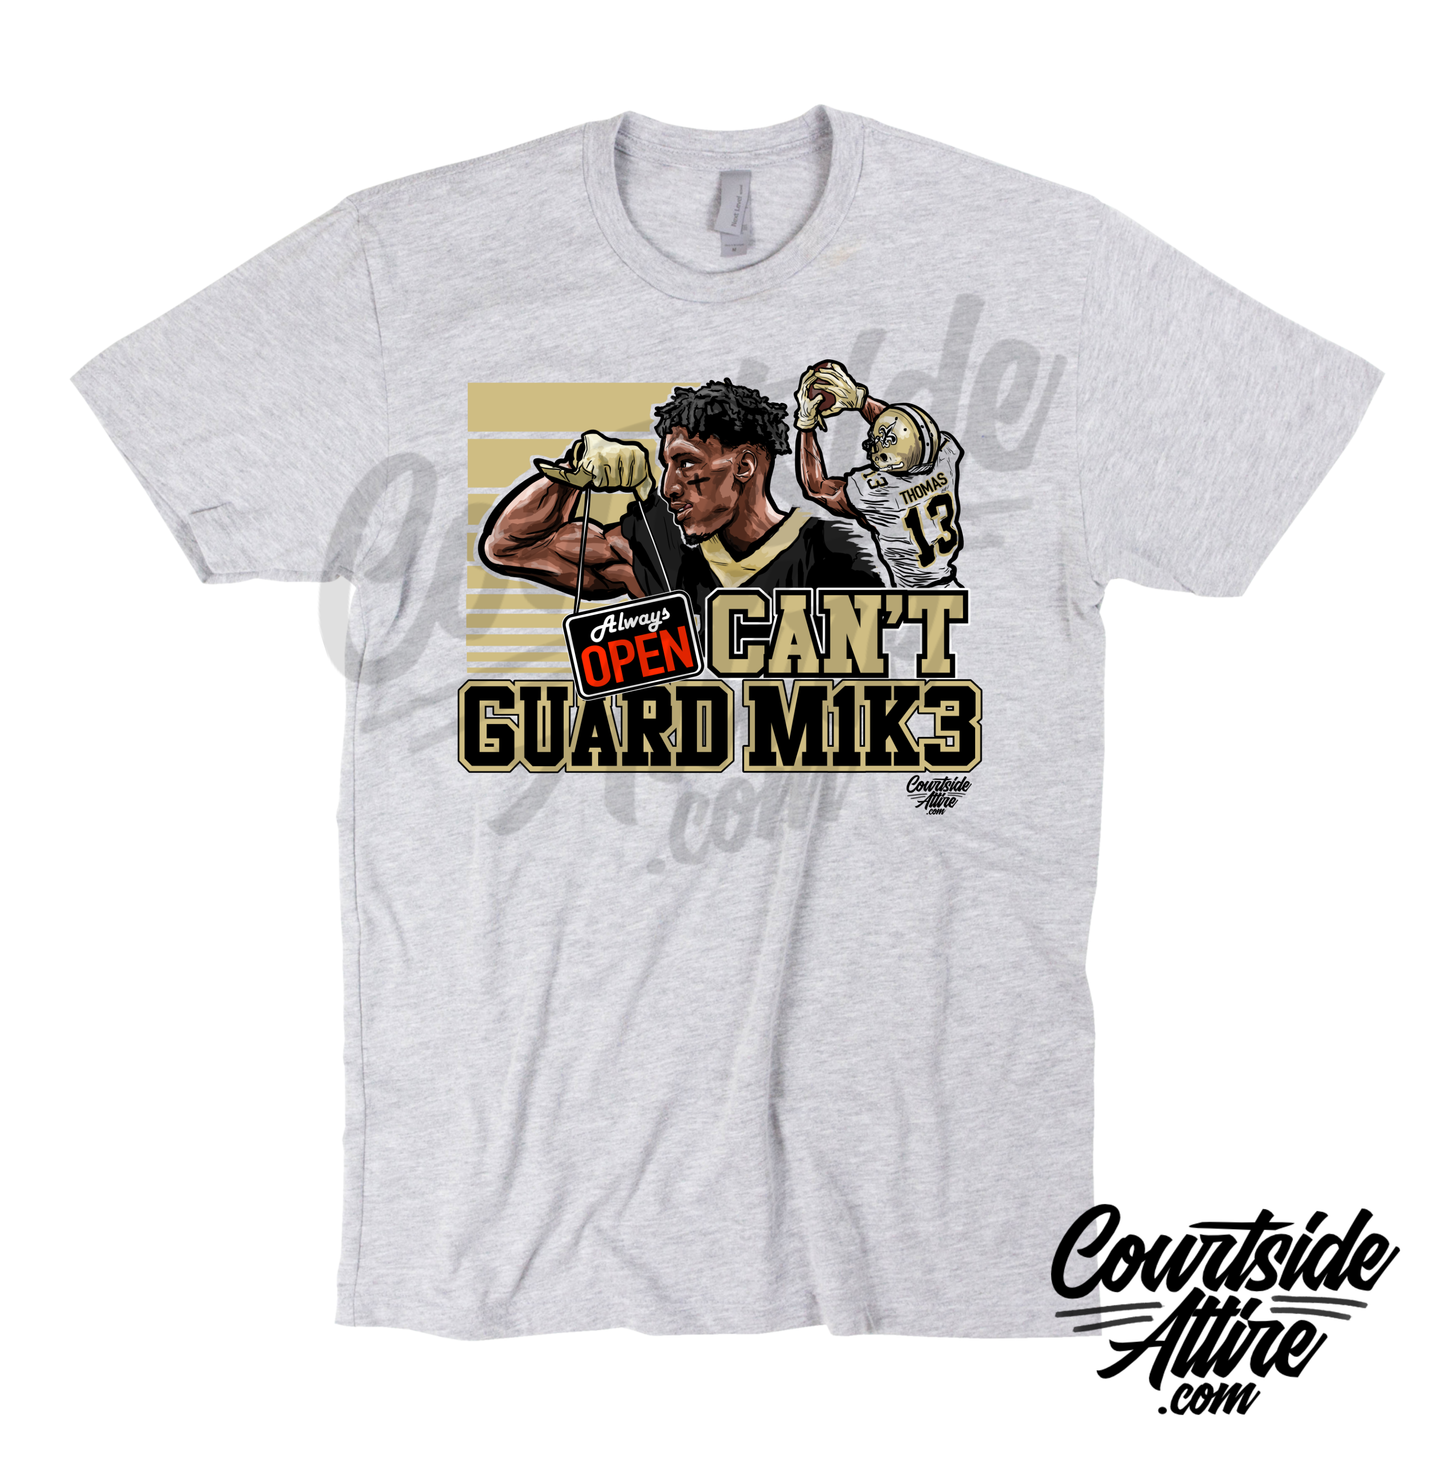 Michael Thomas 'CAN'T GUARD MIKE' Shirt New Orleans jersey adult